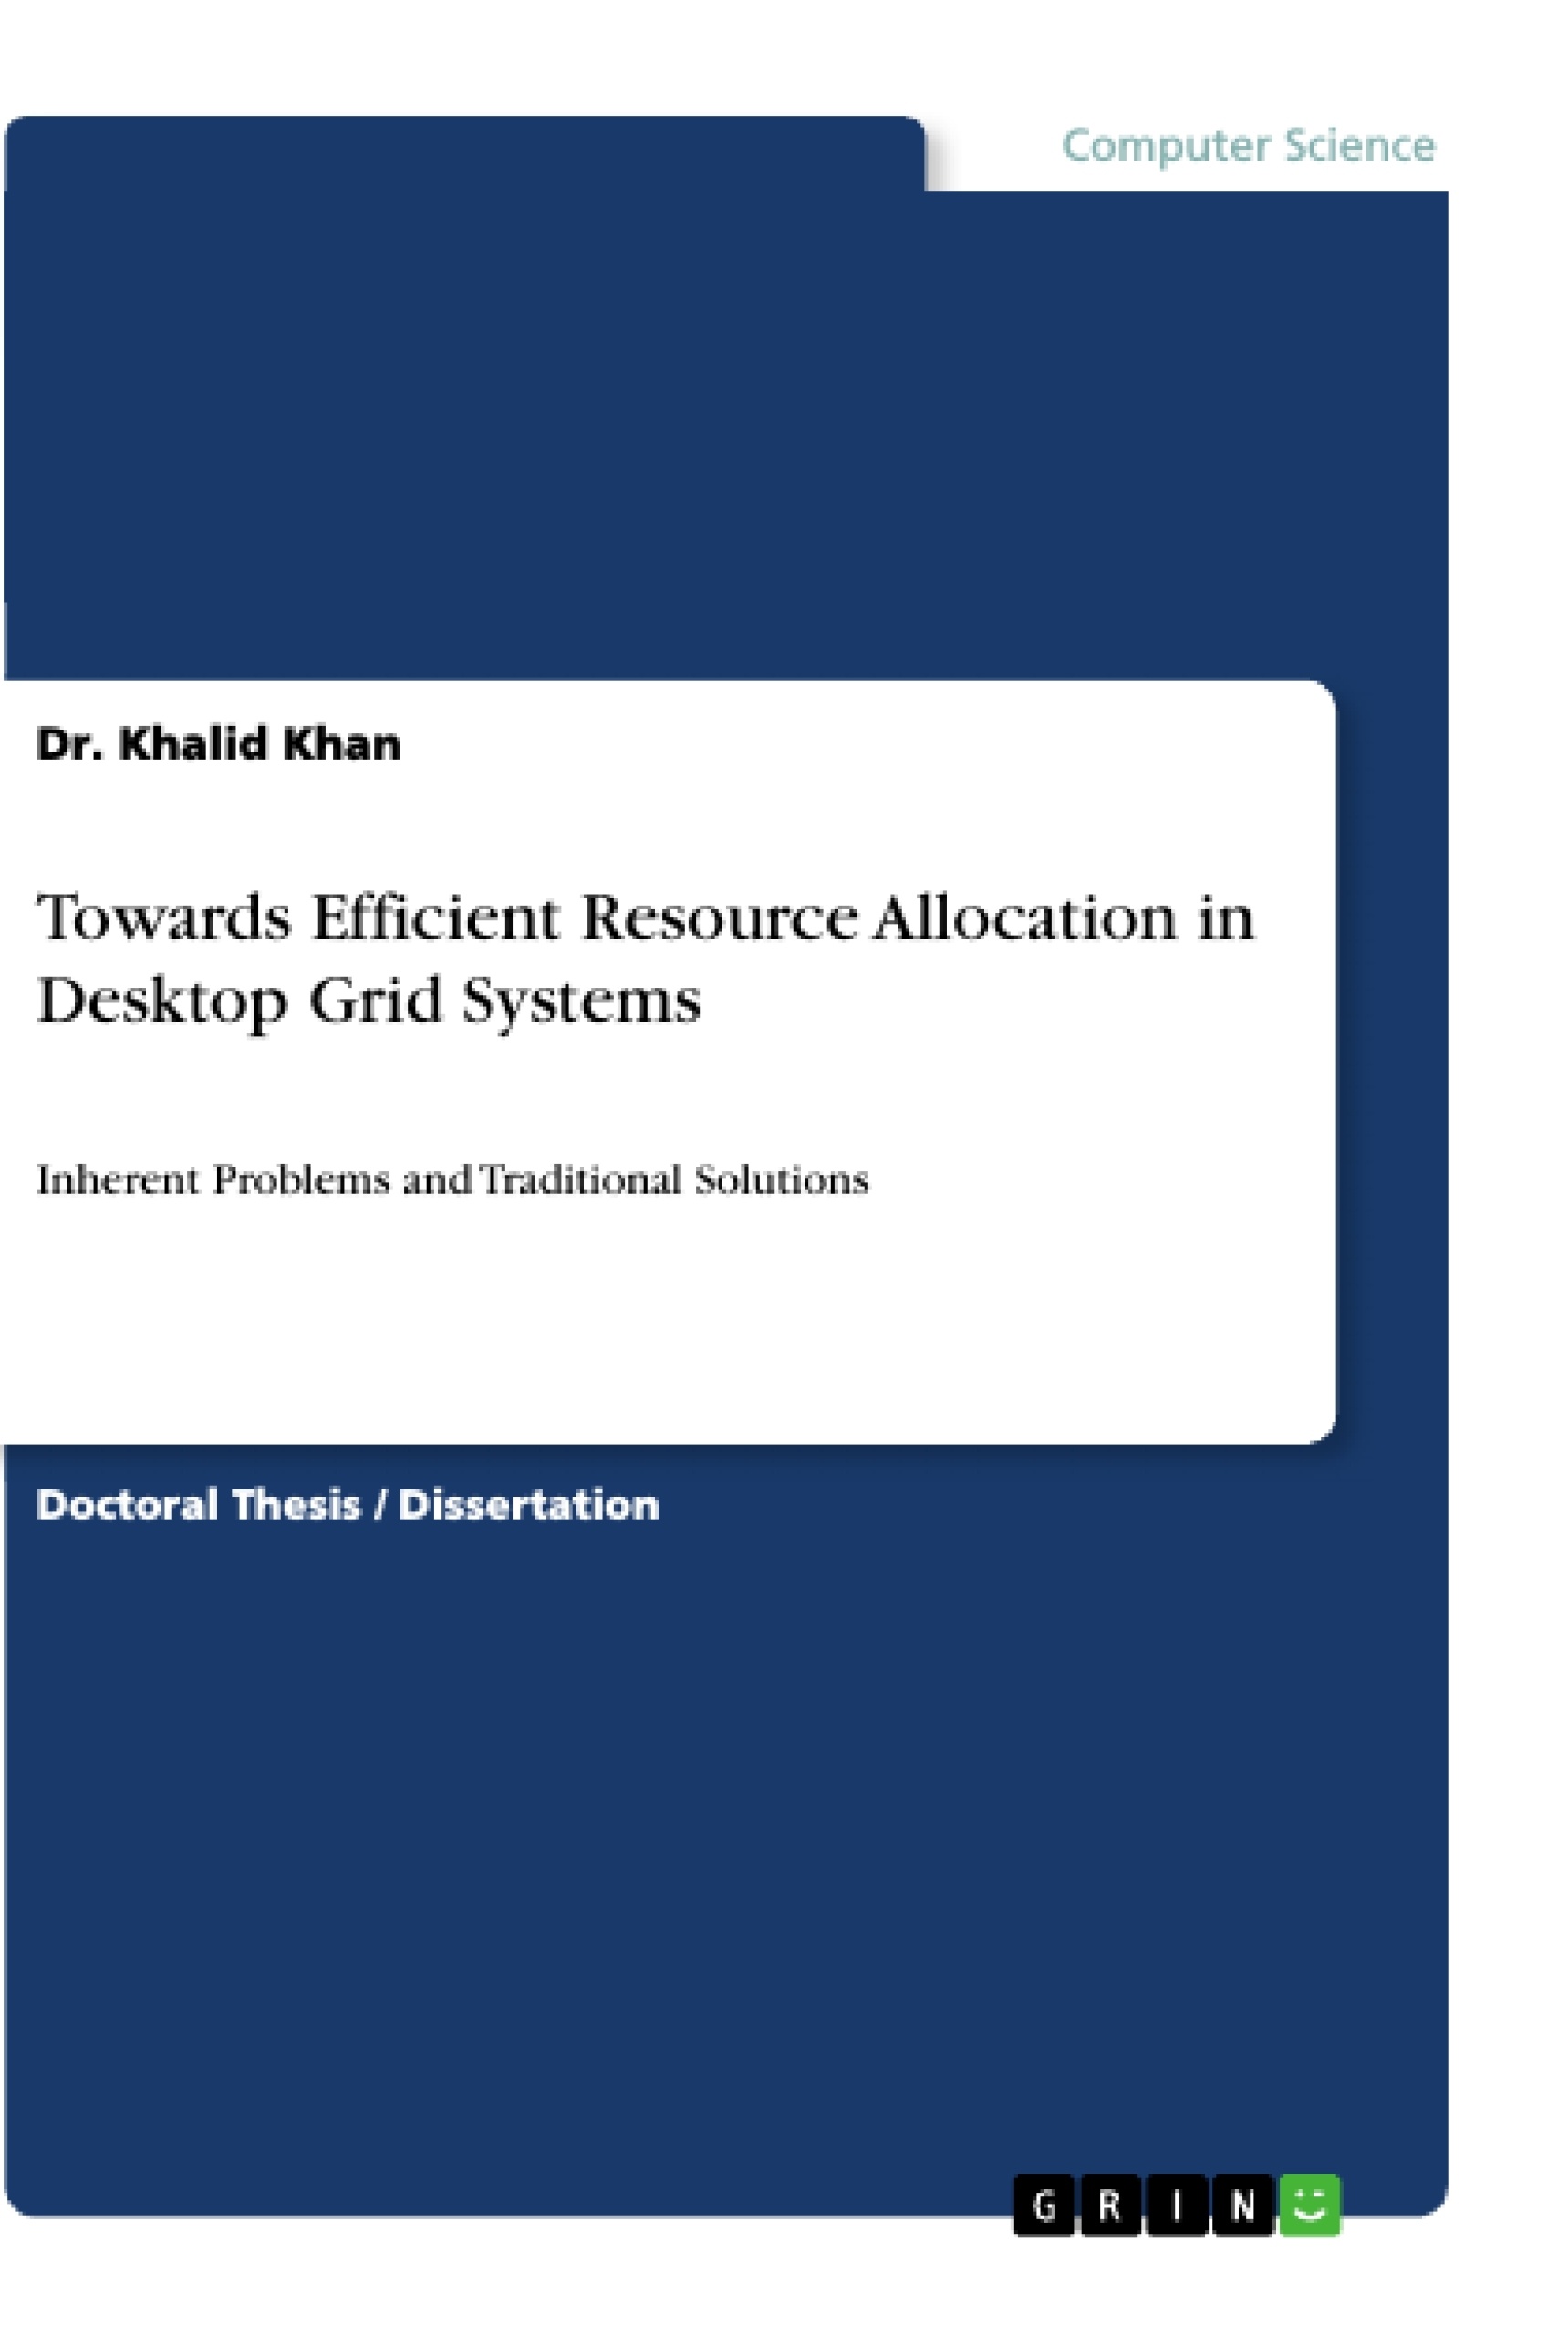 Title: Towards Efficient Resource Allocation in Desktop Grid Systems